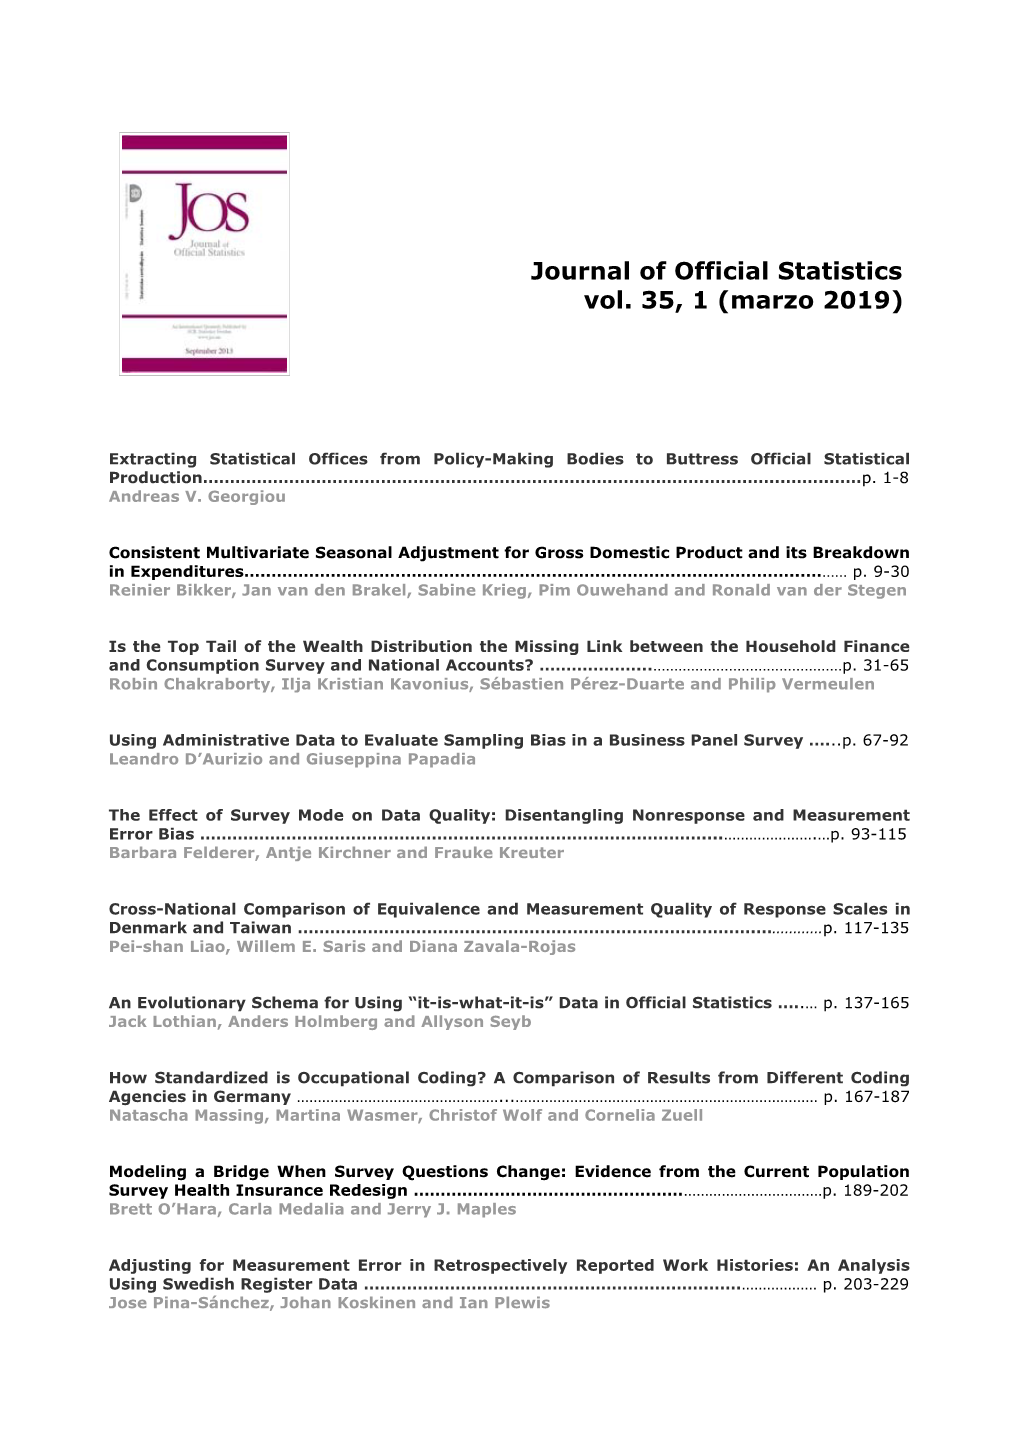 Journal of Official Statistics Vol. 35, 1 (Marzo 2019)